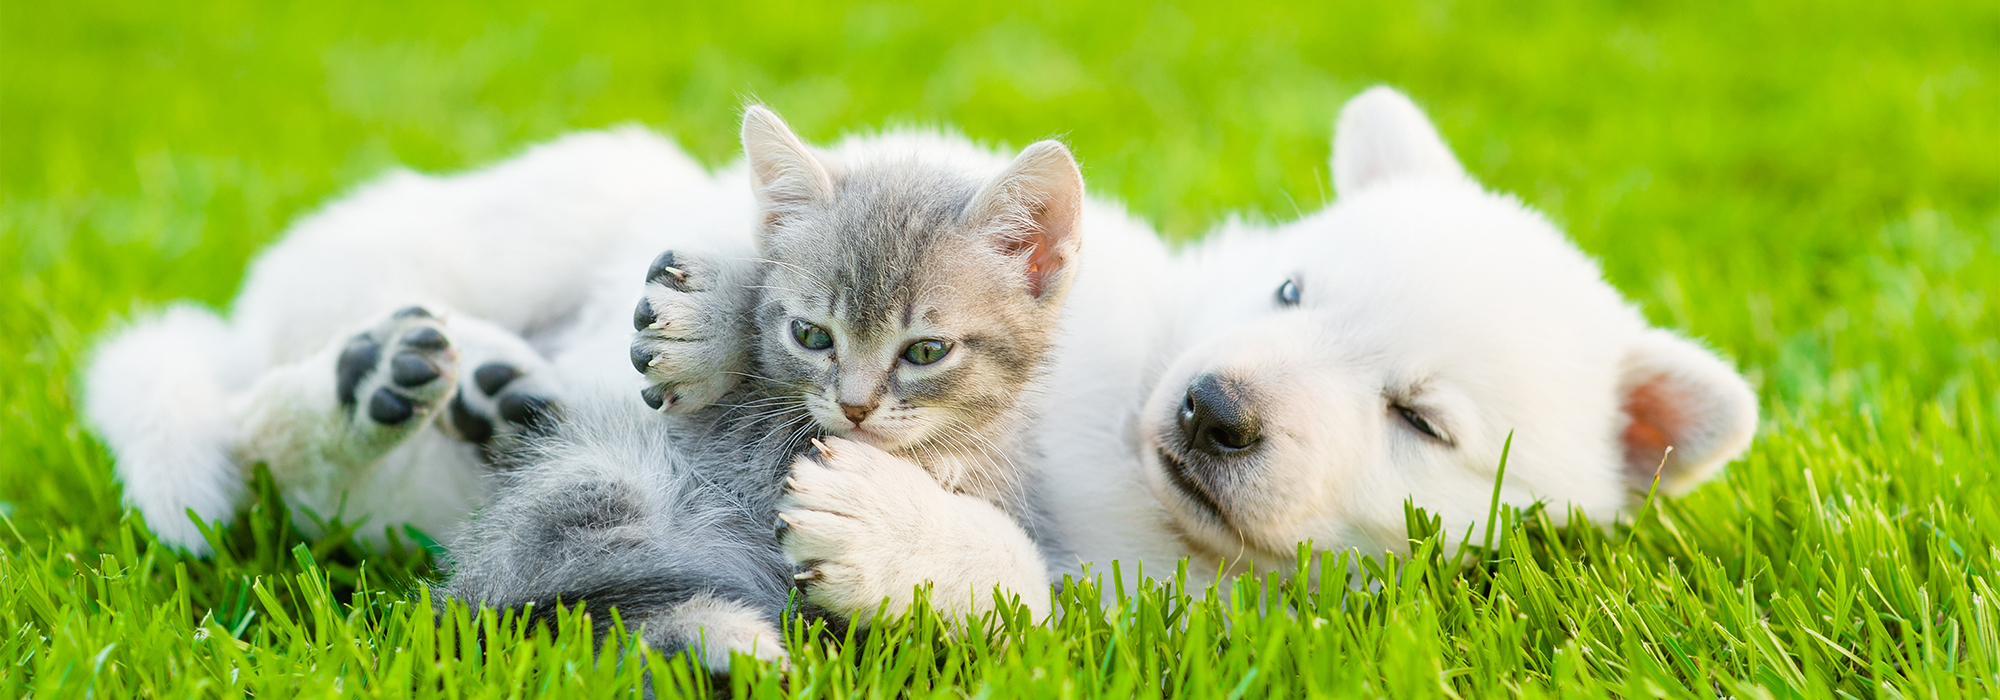 A puppy and a kitten playing in a field